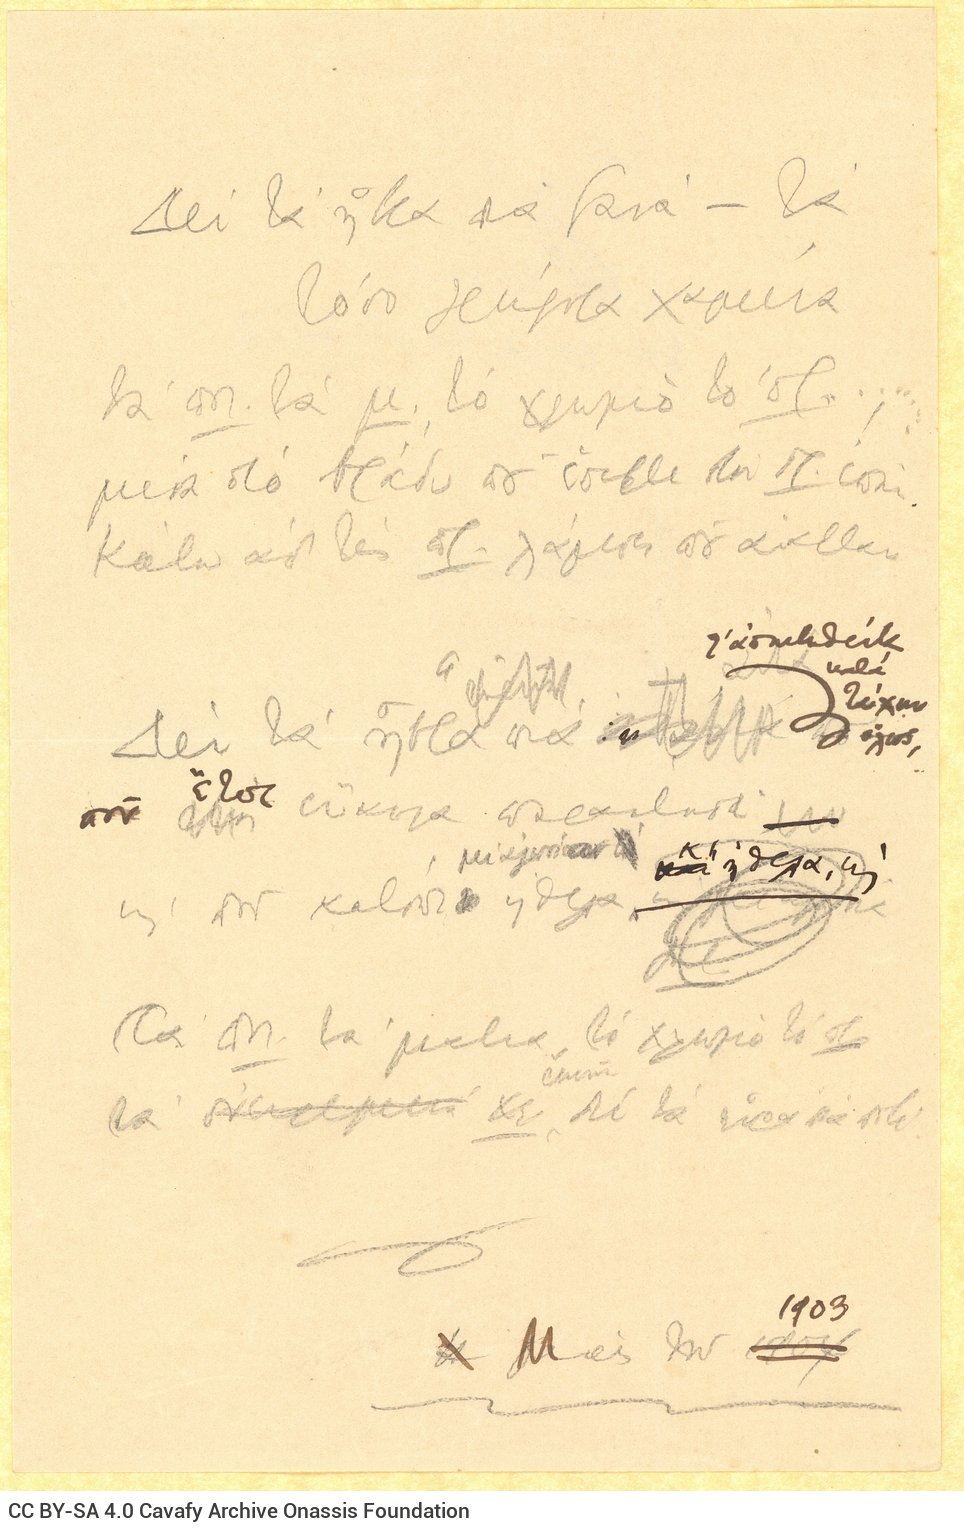 Autograph manuscript of the poem "Days of 1903" on one side of half a ruled sheet. Cancellations and emendations. Underlined 